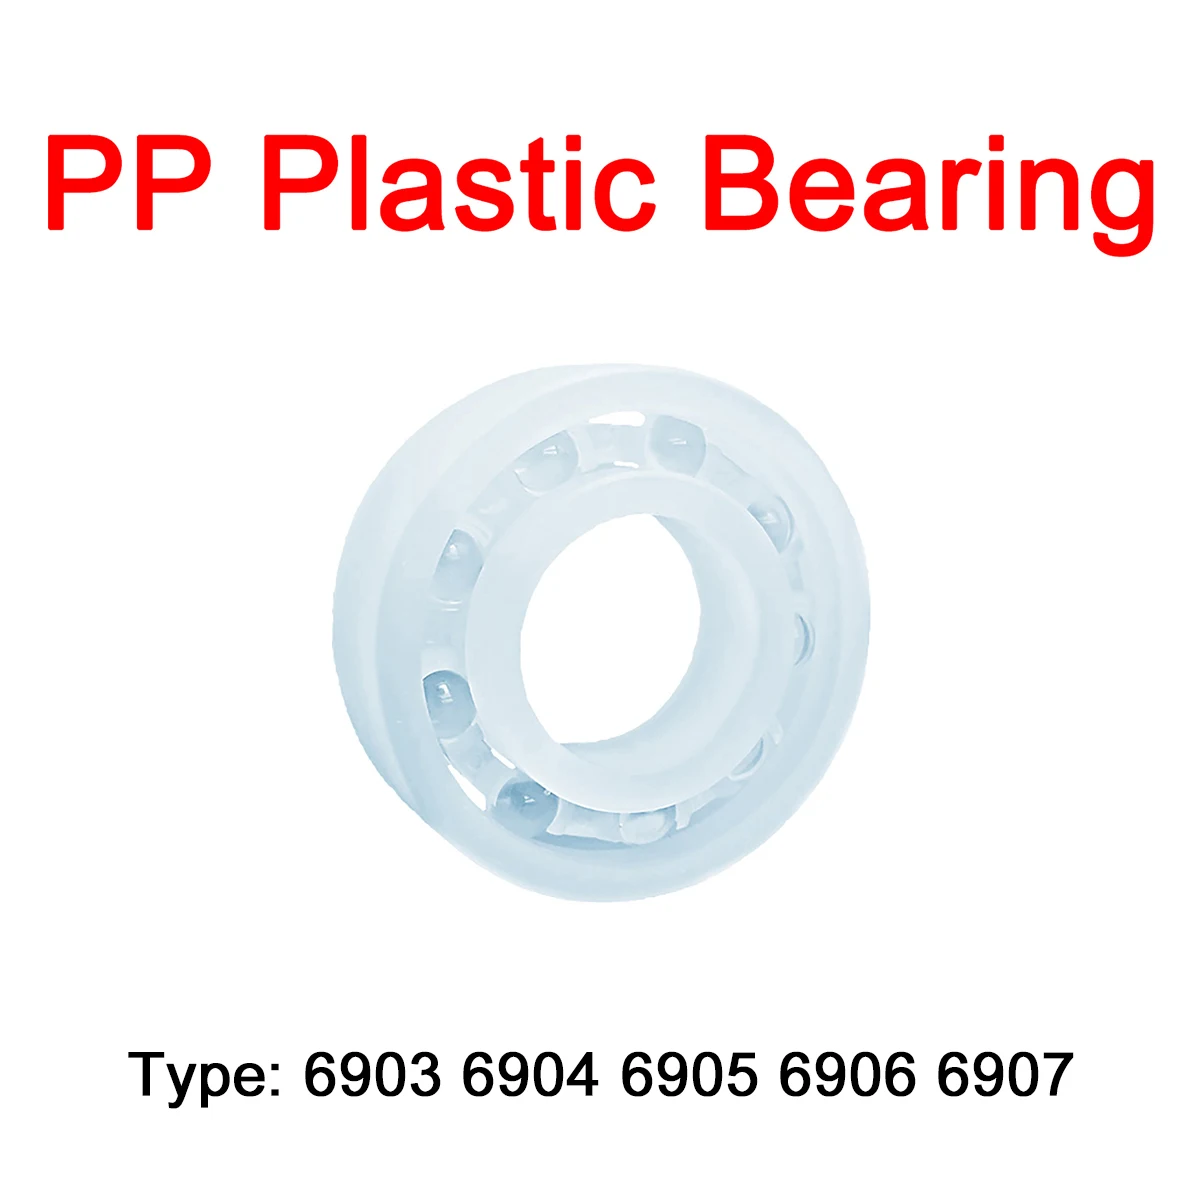 

2Pcs PP Plastic Bearings Corrosion Resistant 6903 - 6907 Polypropylene High Precision Low Noise Electrical Insulation